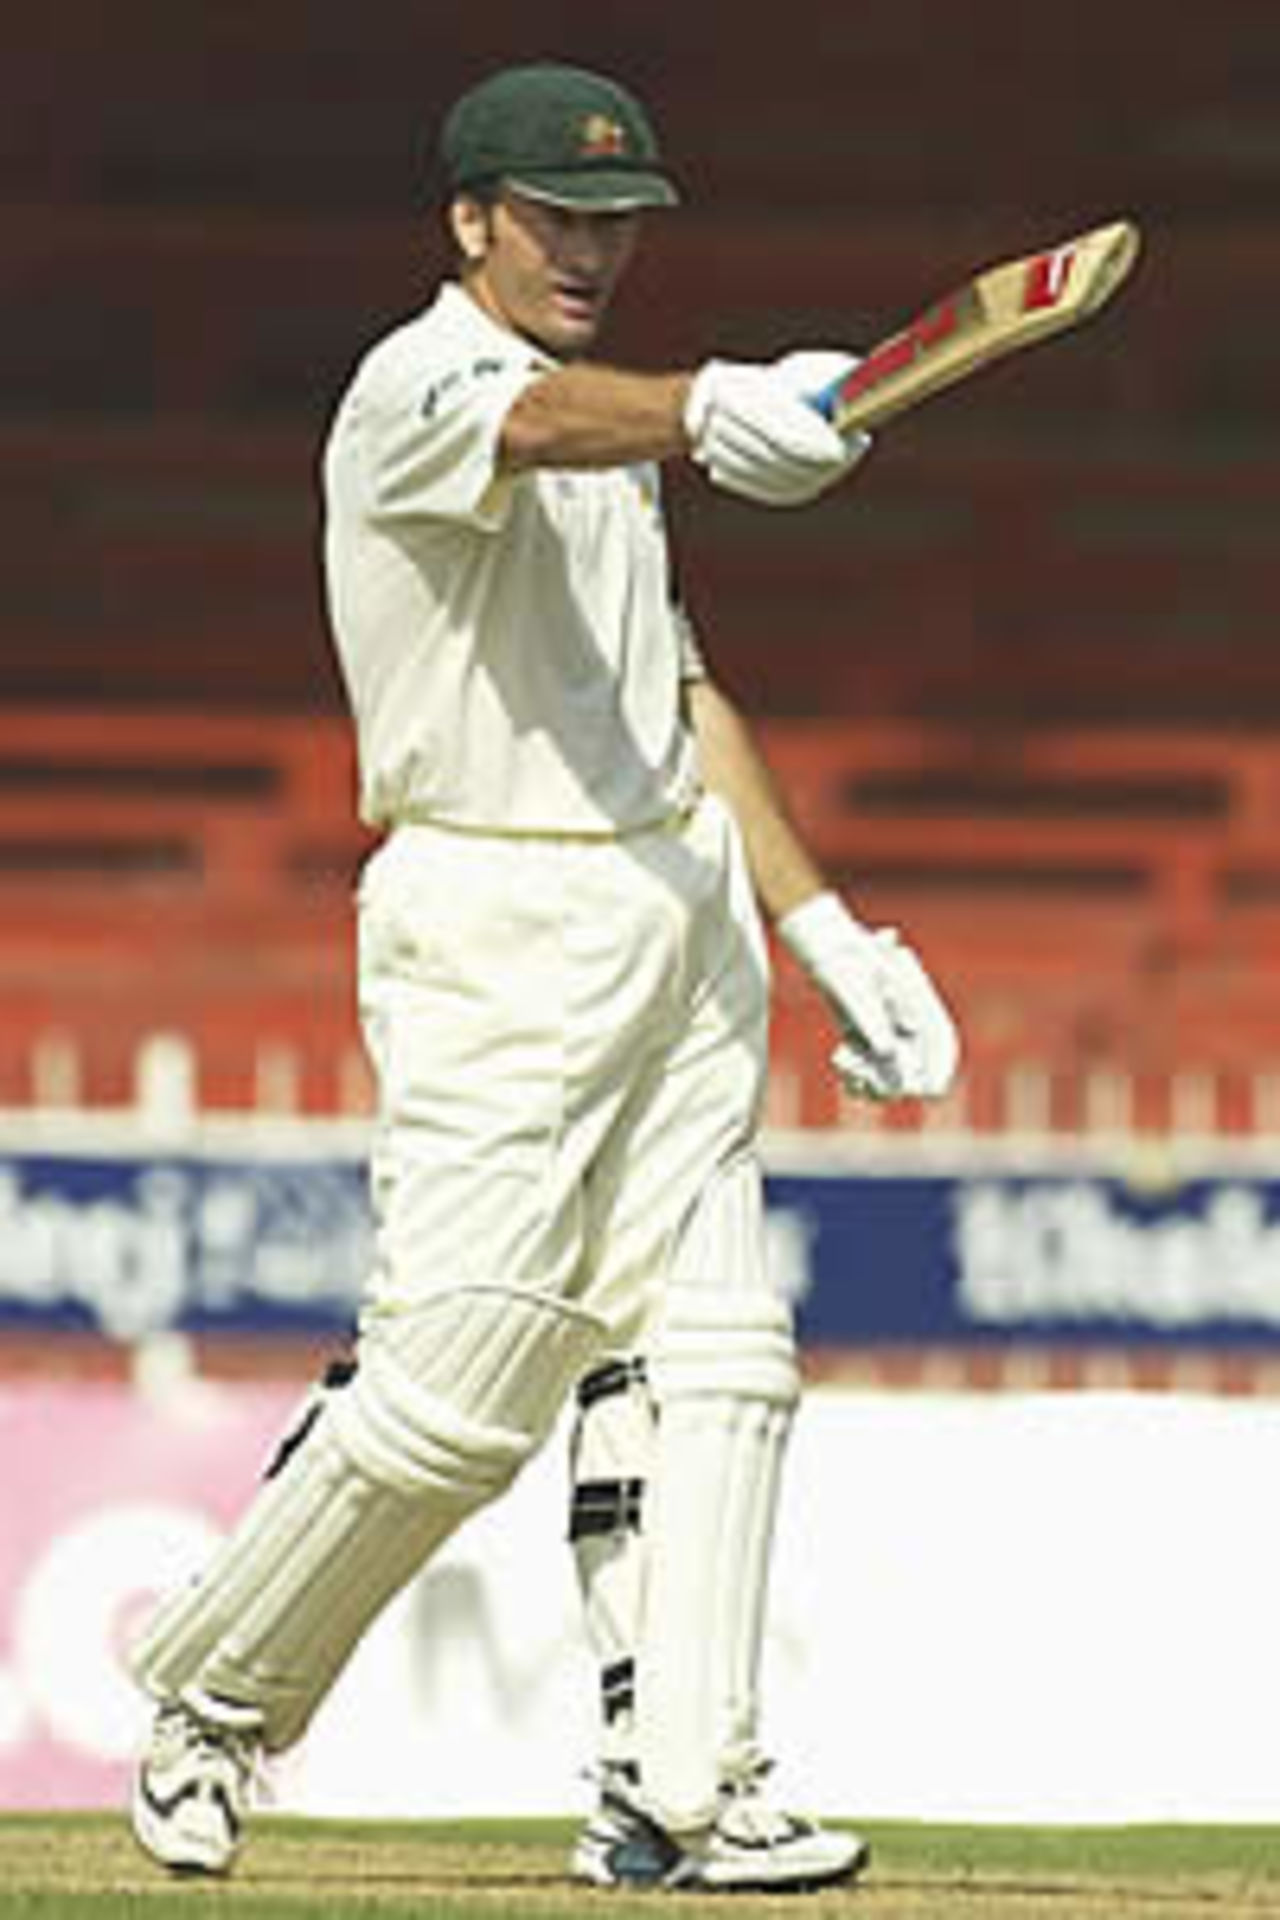 SHARJAH - OCTOBER 20: Steve Waugh of Australia celebrates his century, during day two of the Third Test between Pakistan and Australia, played at Sharjah International Cricket Stadium, Sharjah, United Arab Emirates on October 20, 2002.